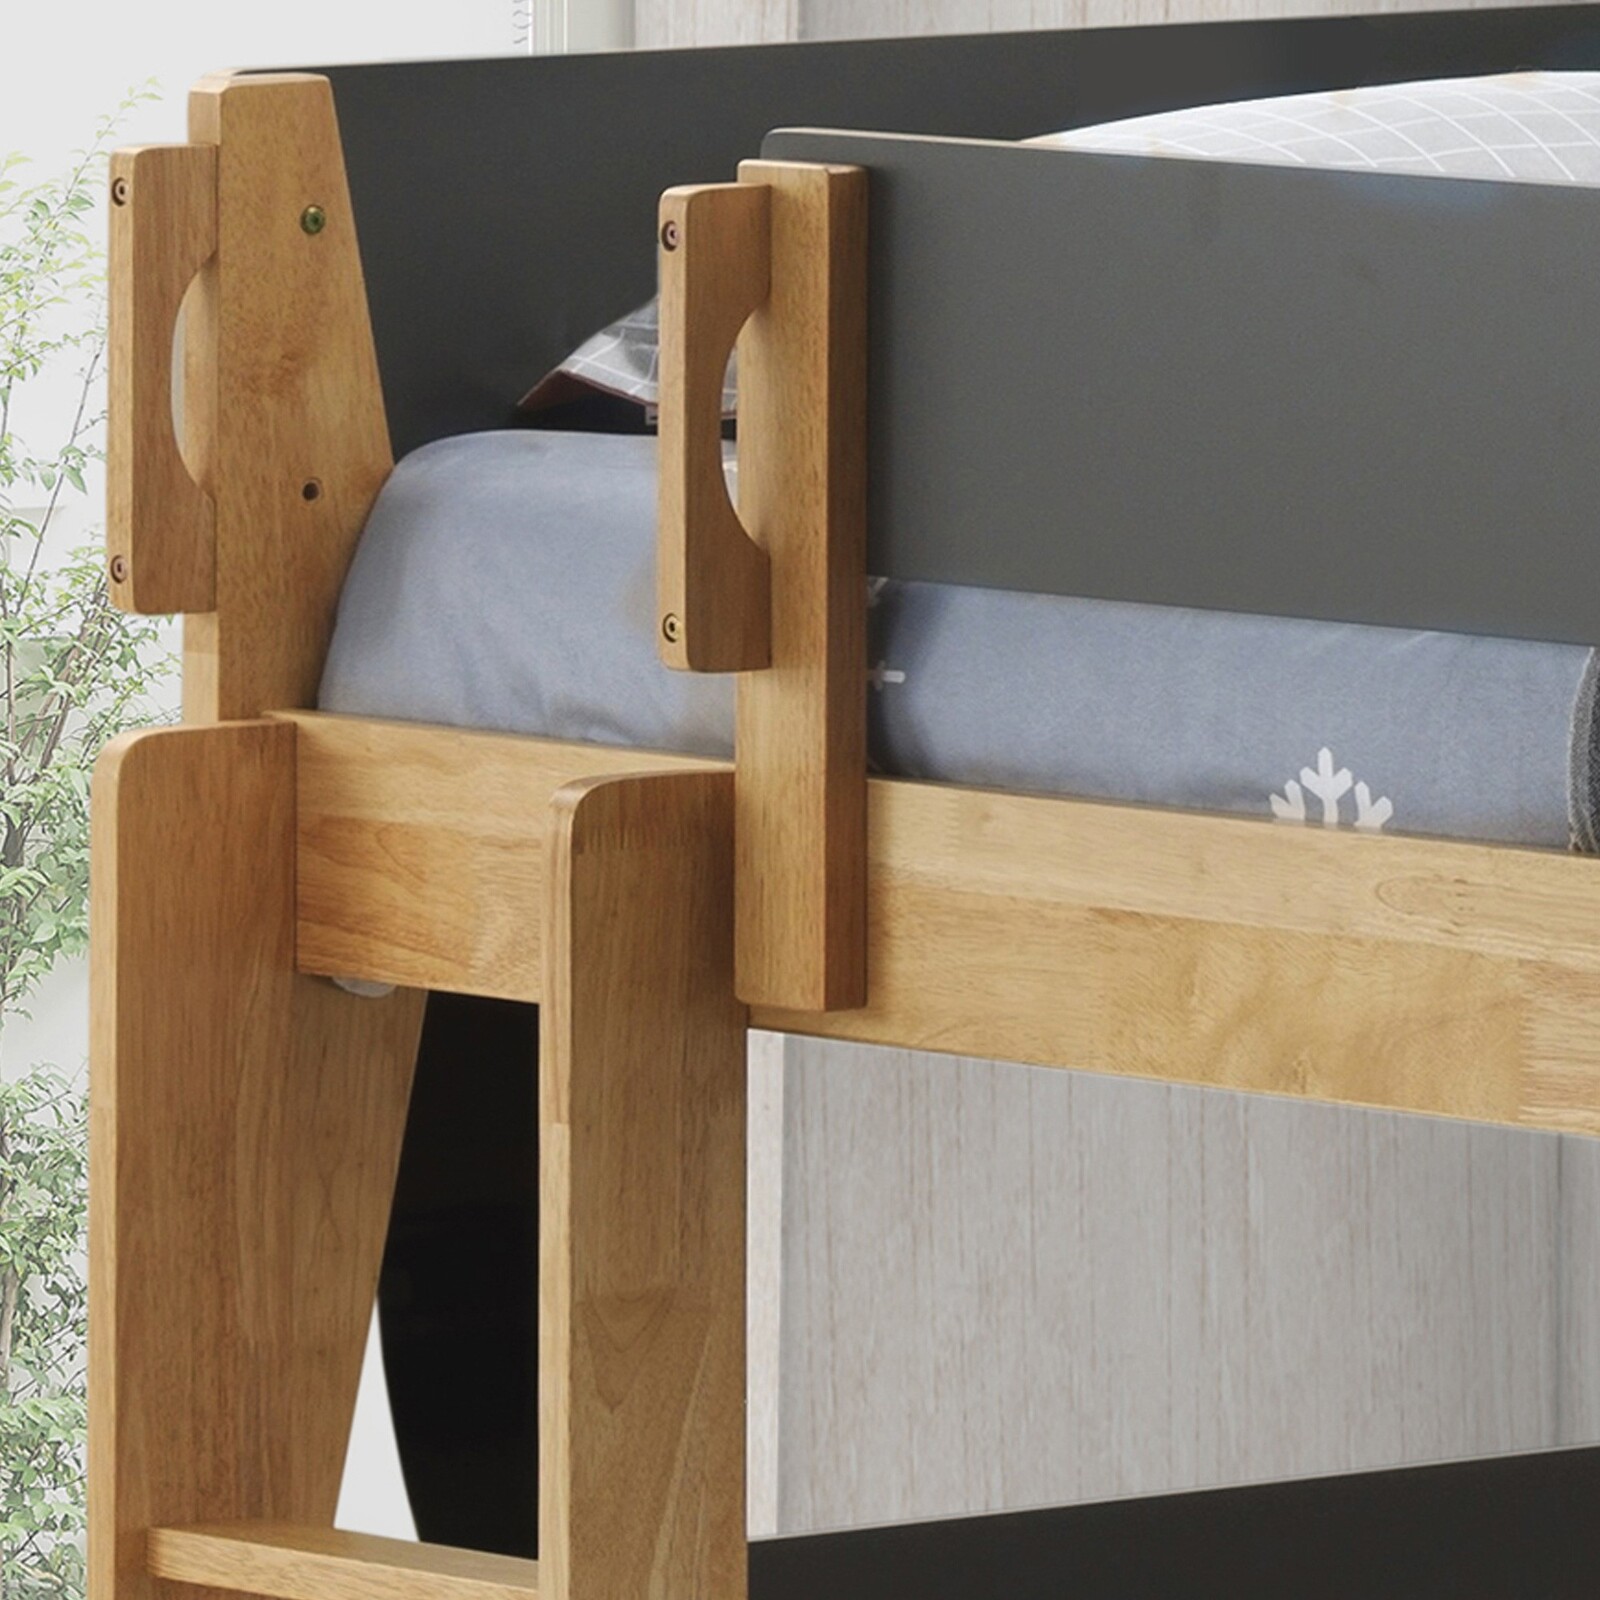 Irvine Single Bunk Bed Charcoal